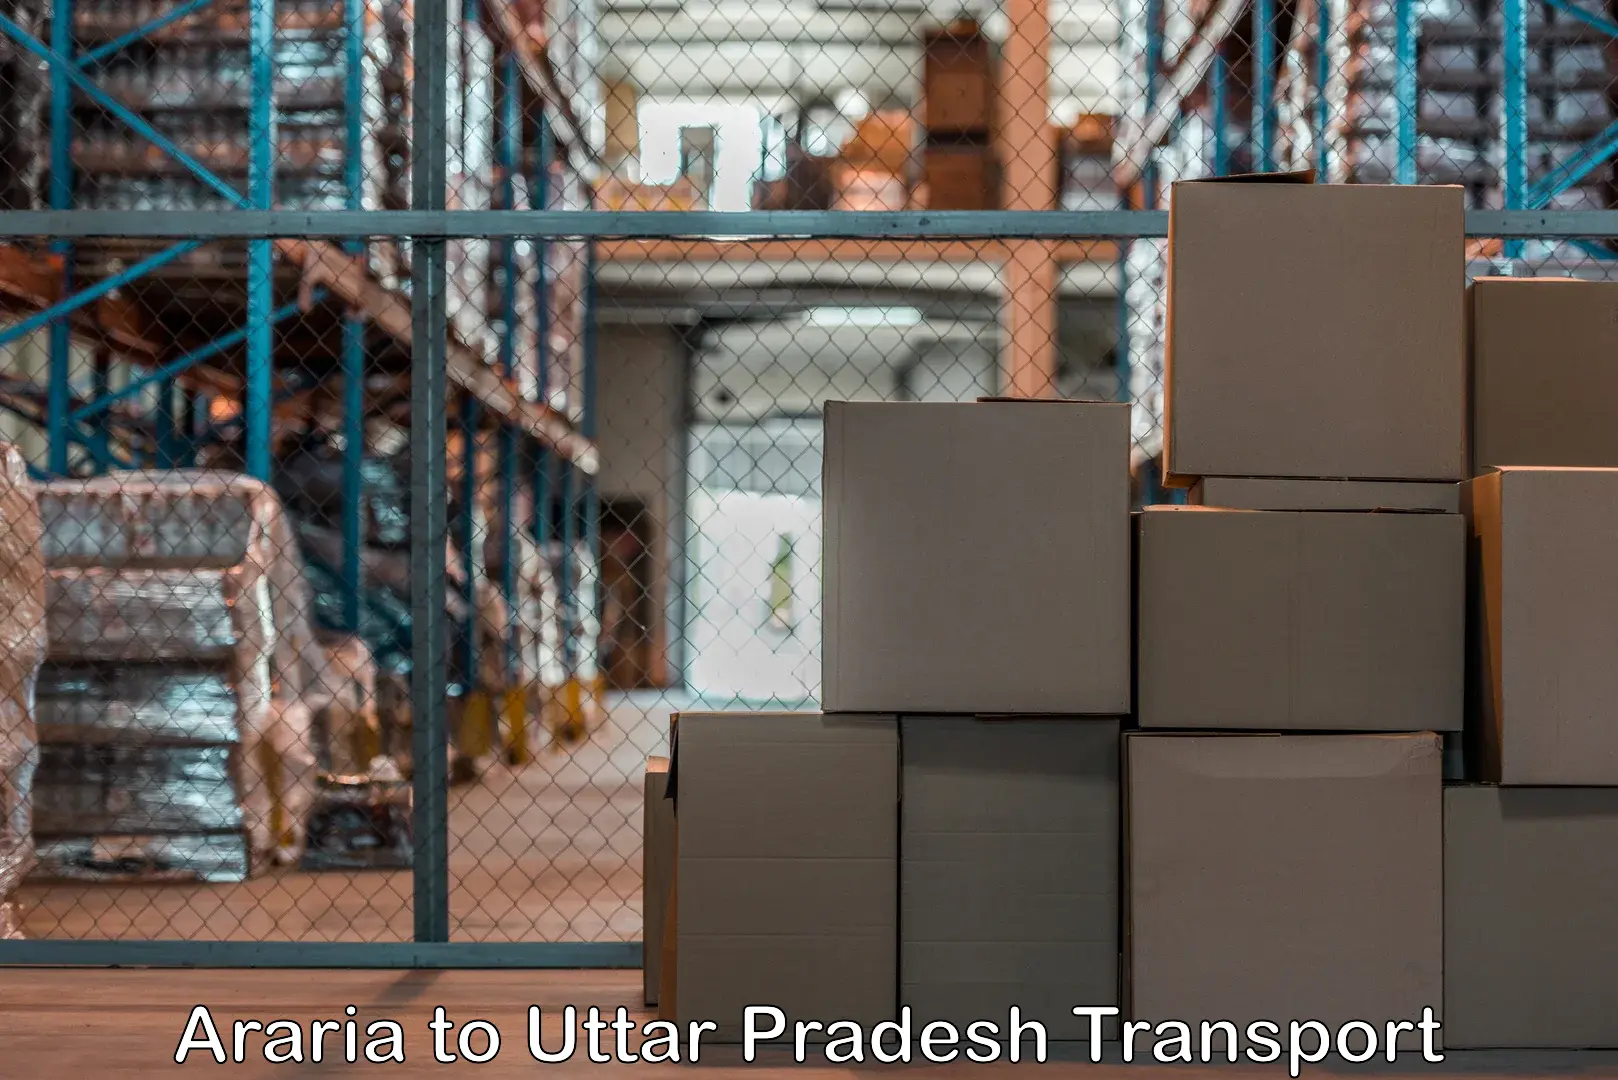 Shipping partner Araria to King Georges Medical University Lucknow